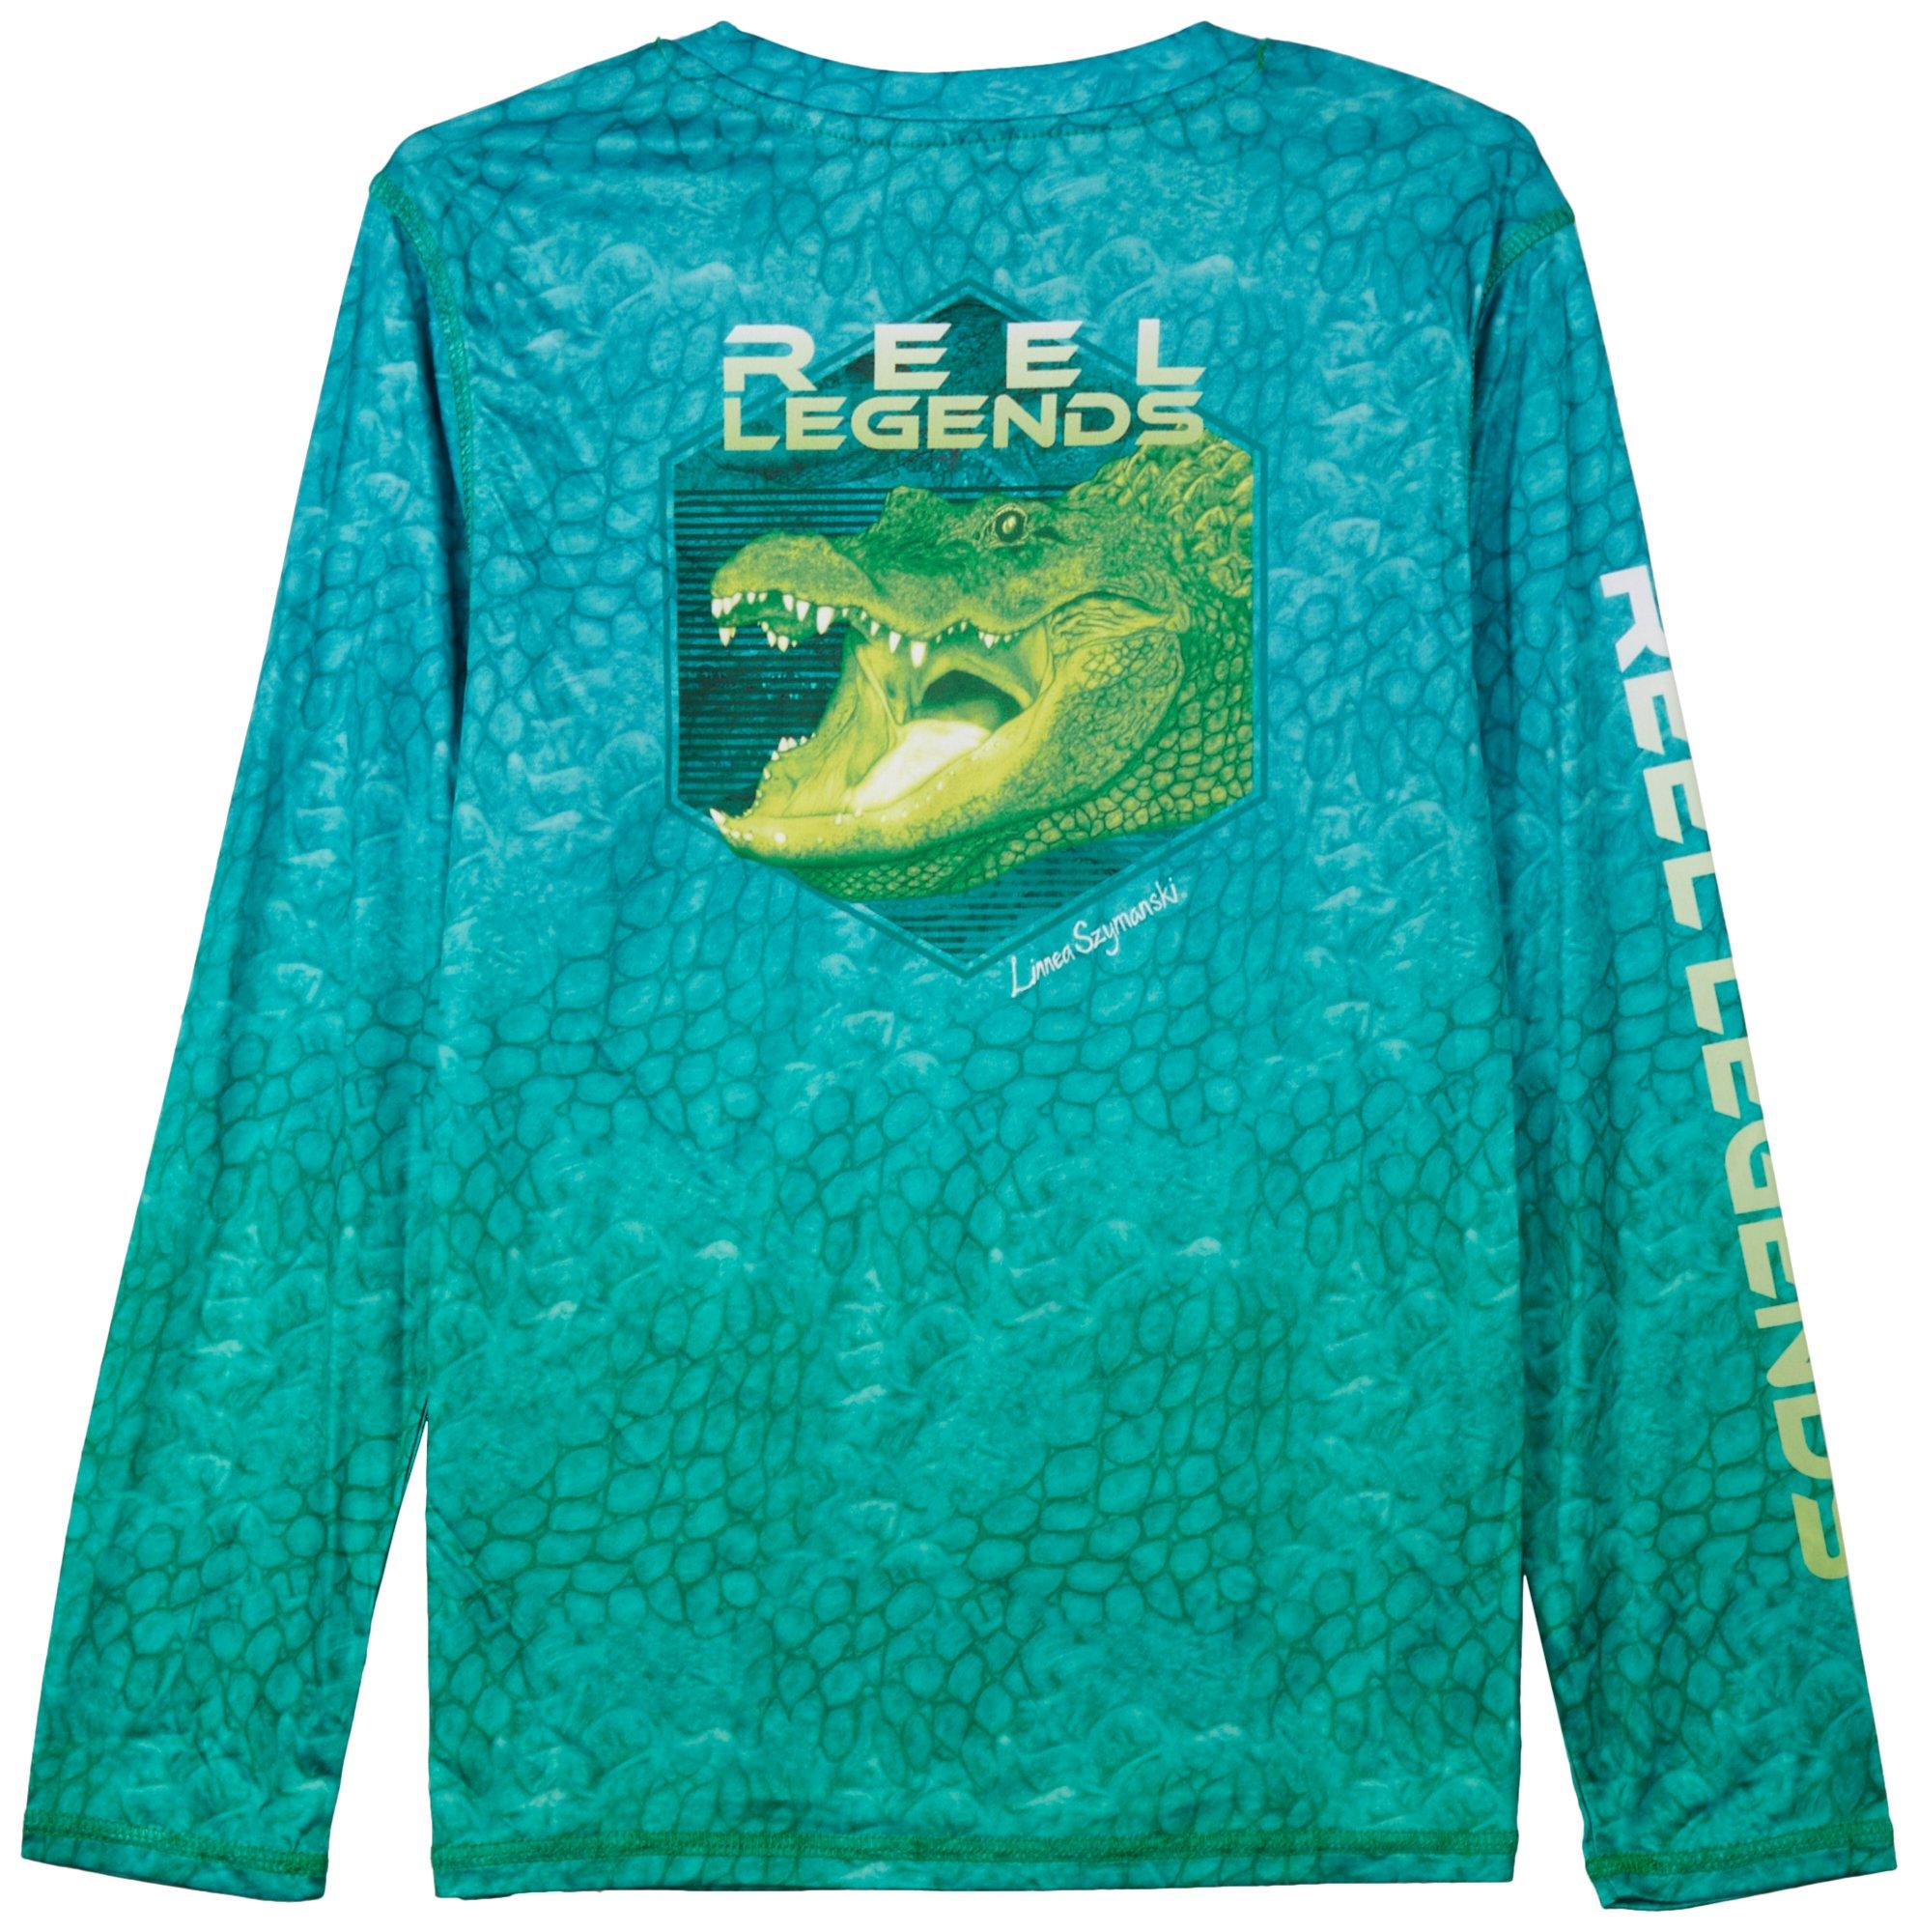  Southern Fin Apparel Youth Fishing Shirt for Kids Boys